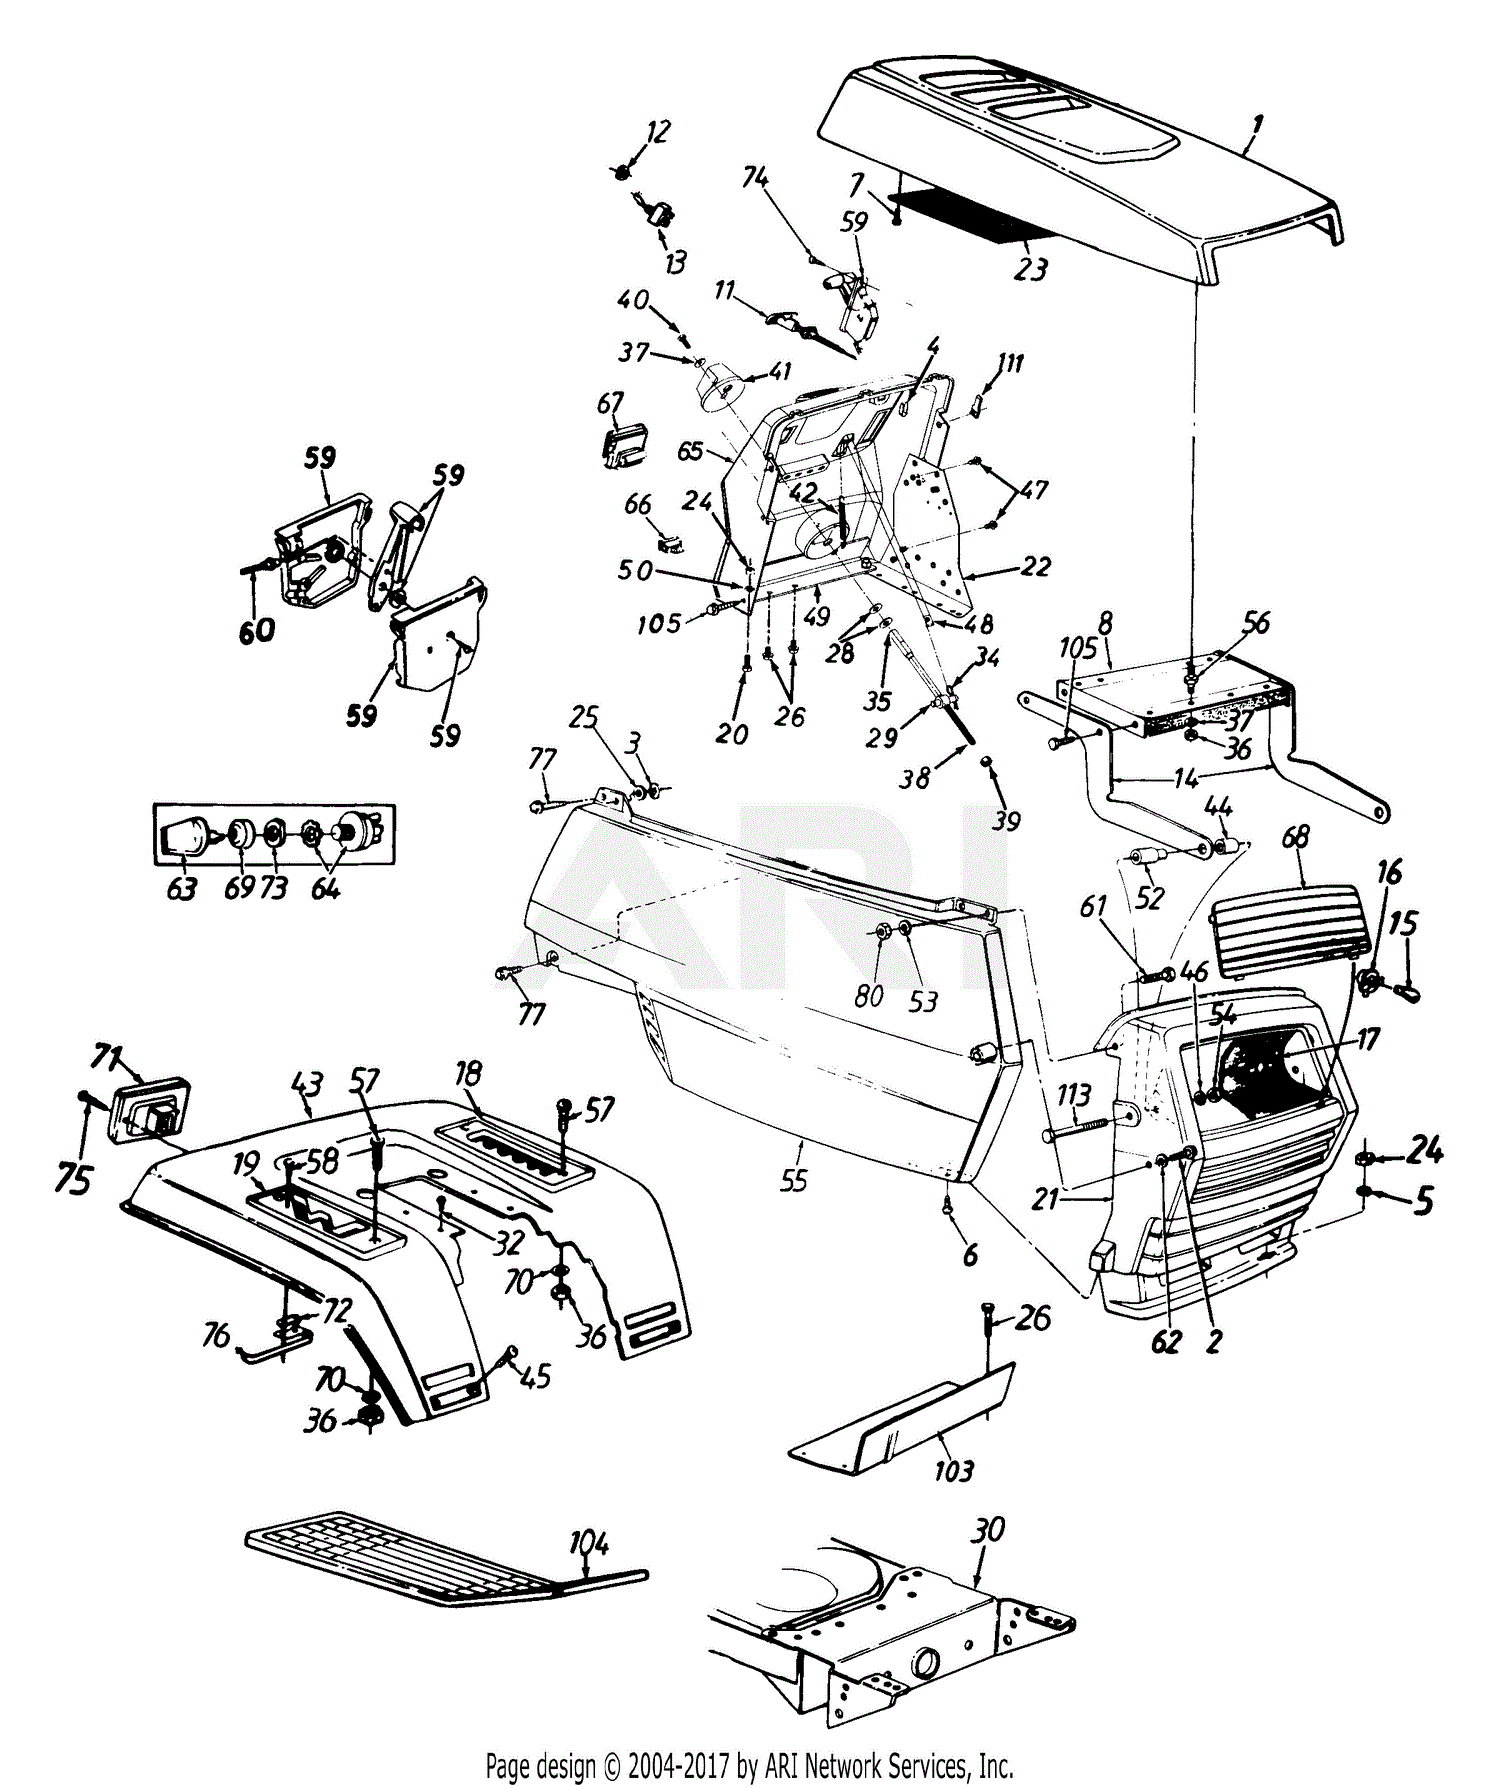 Mtd Lawn Tractor Parts Diagram Mtd 770 Front Engine Lawn Tractor